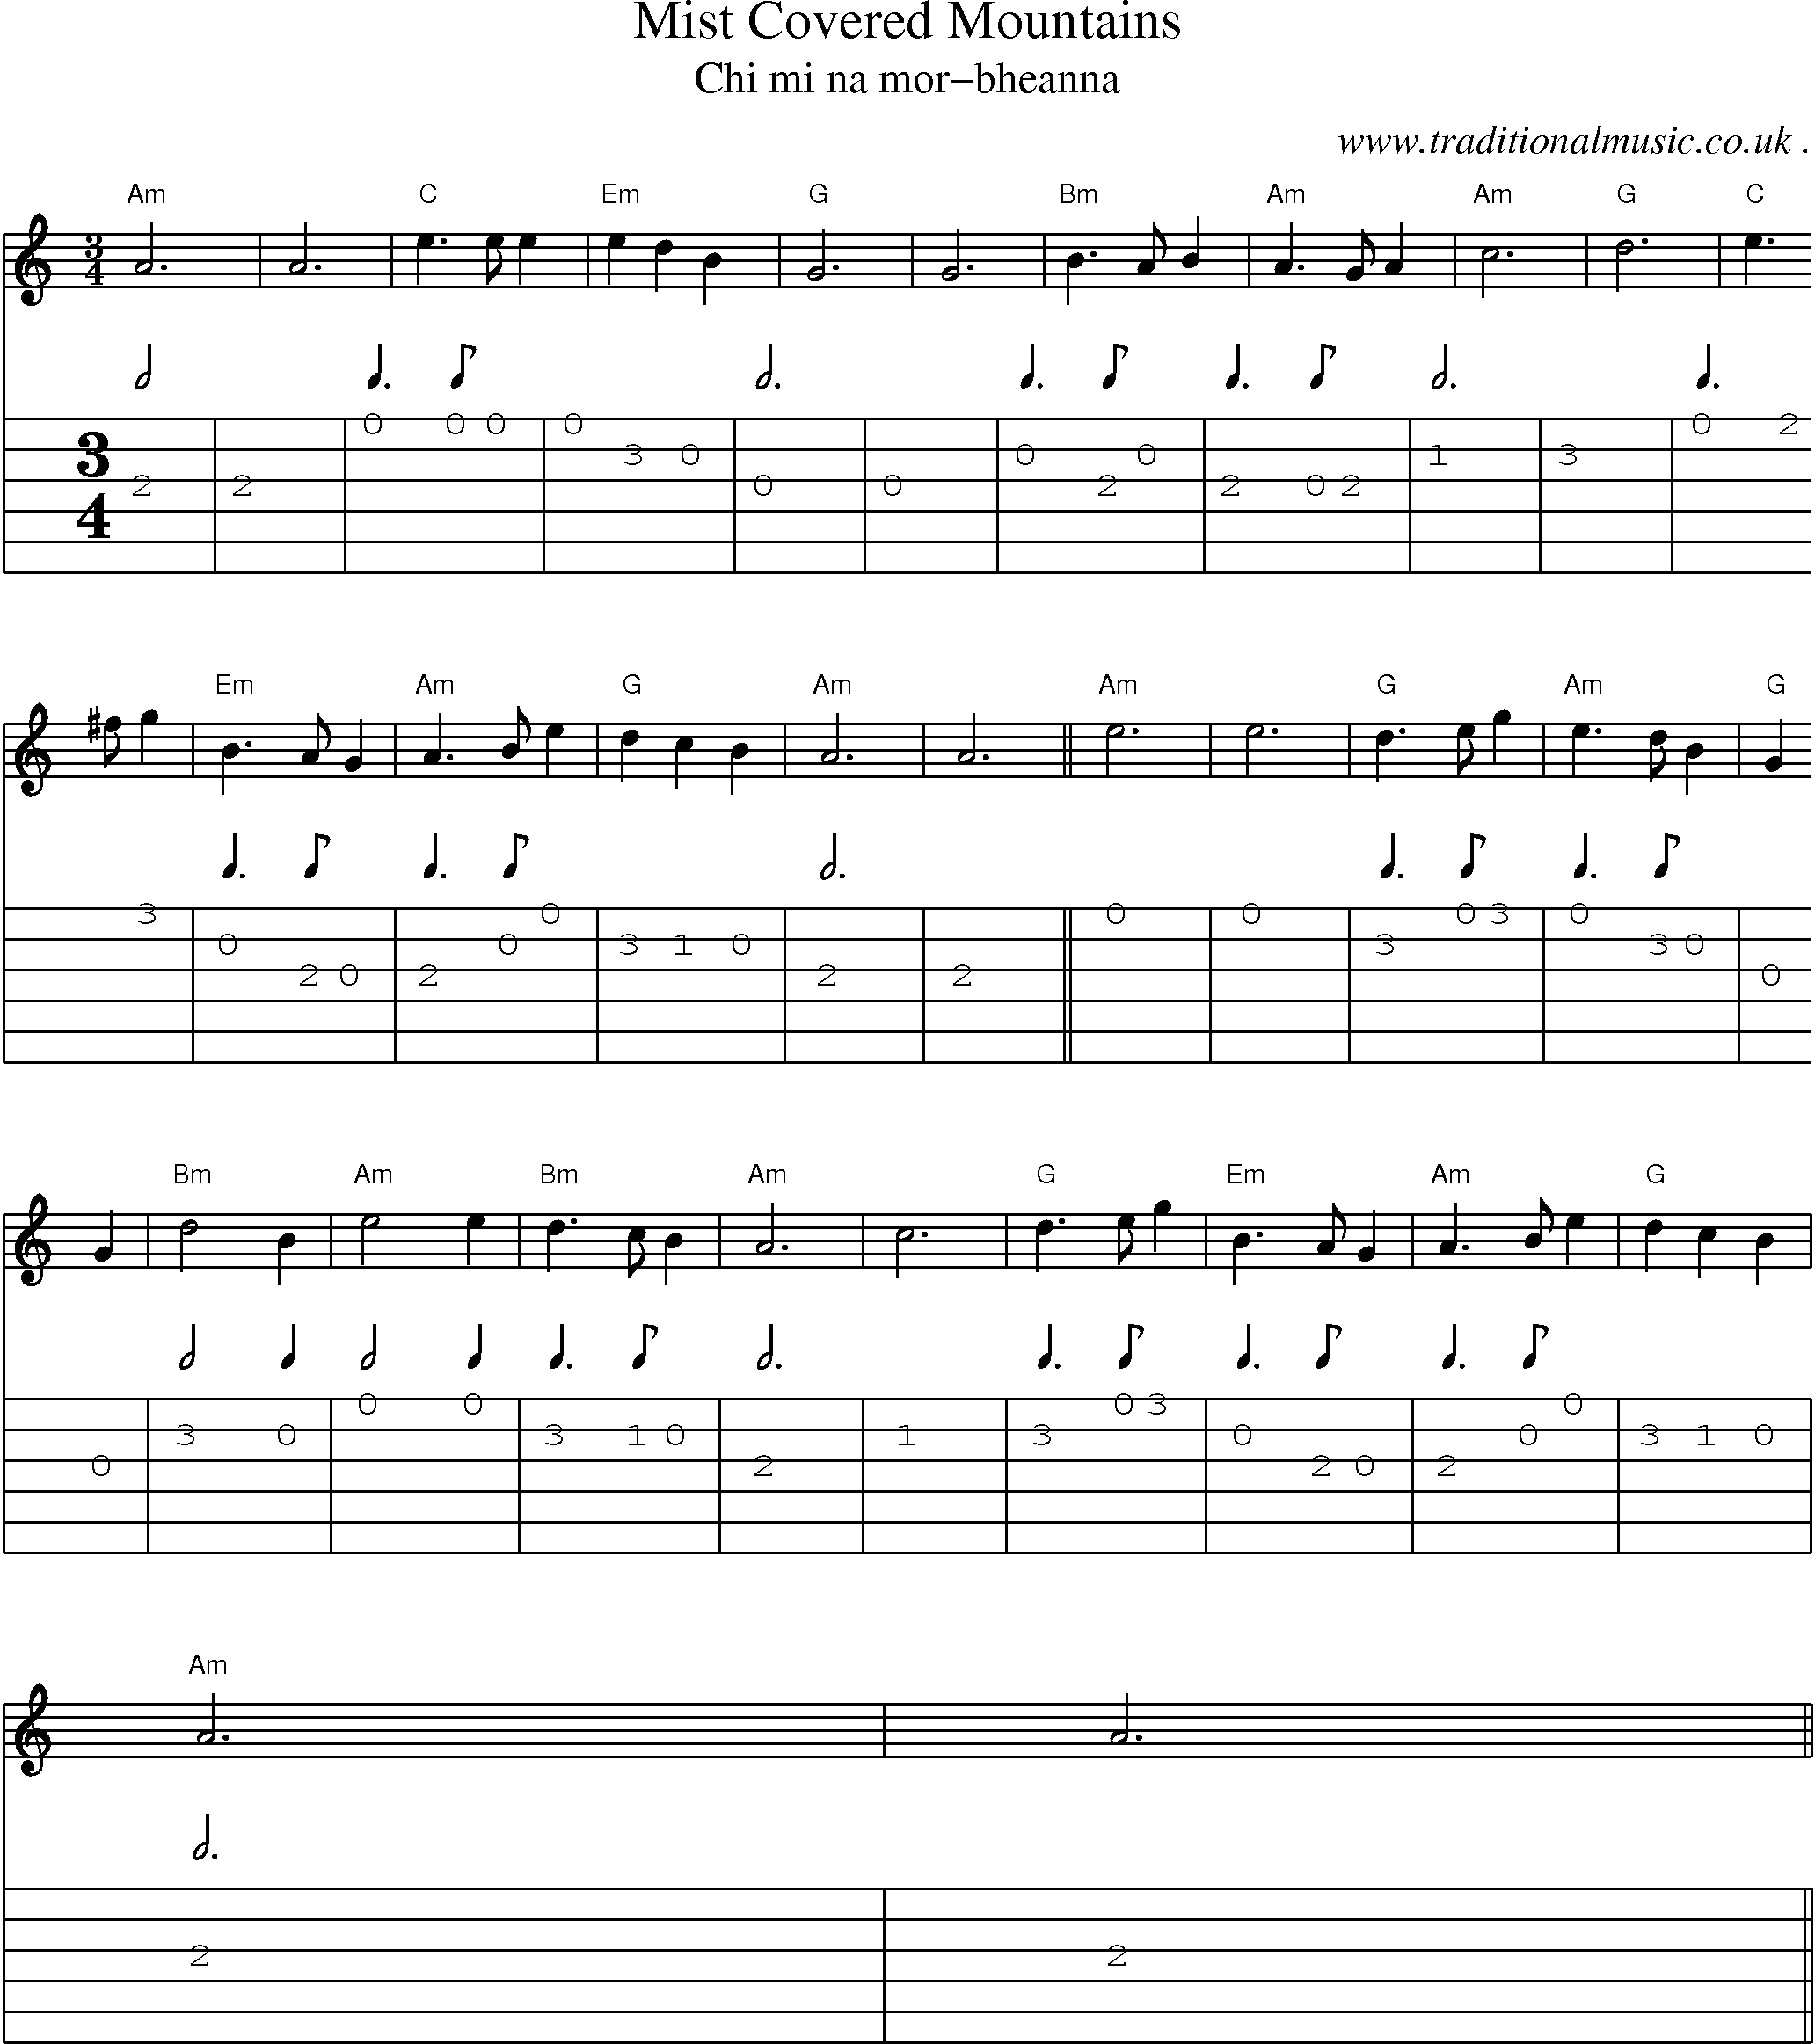 Sheet-Music and Guitar Tabs for Mist Covered Mountains